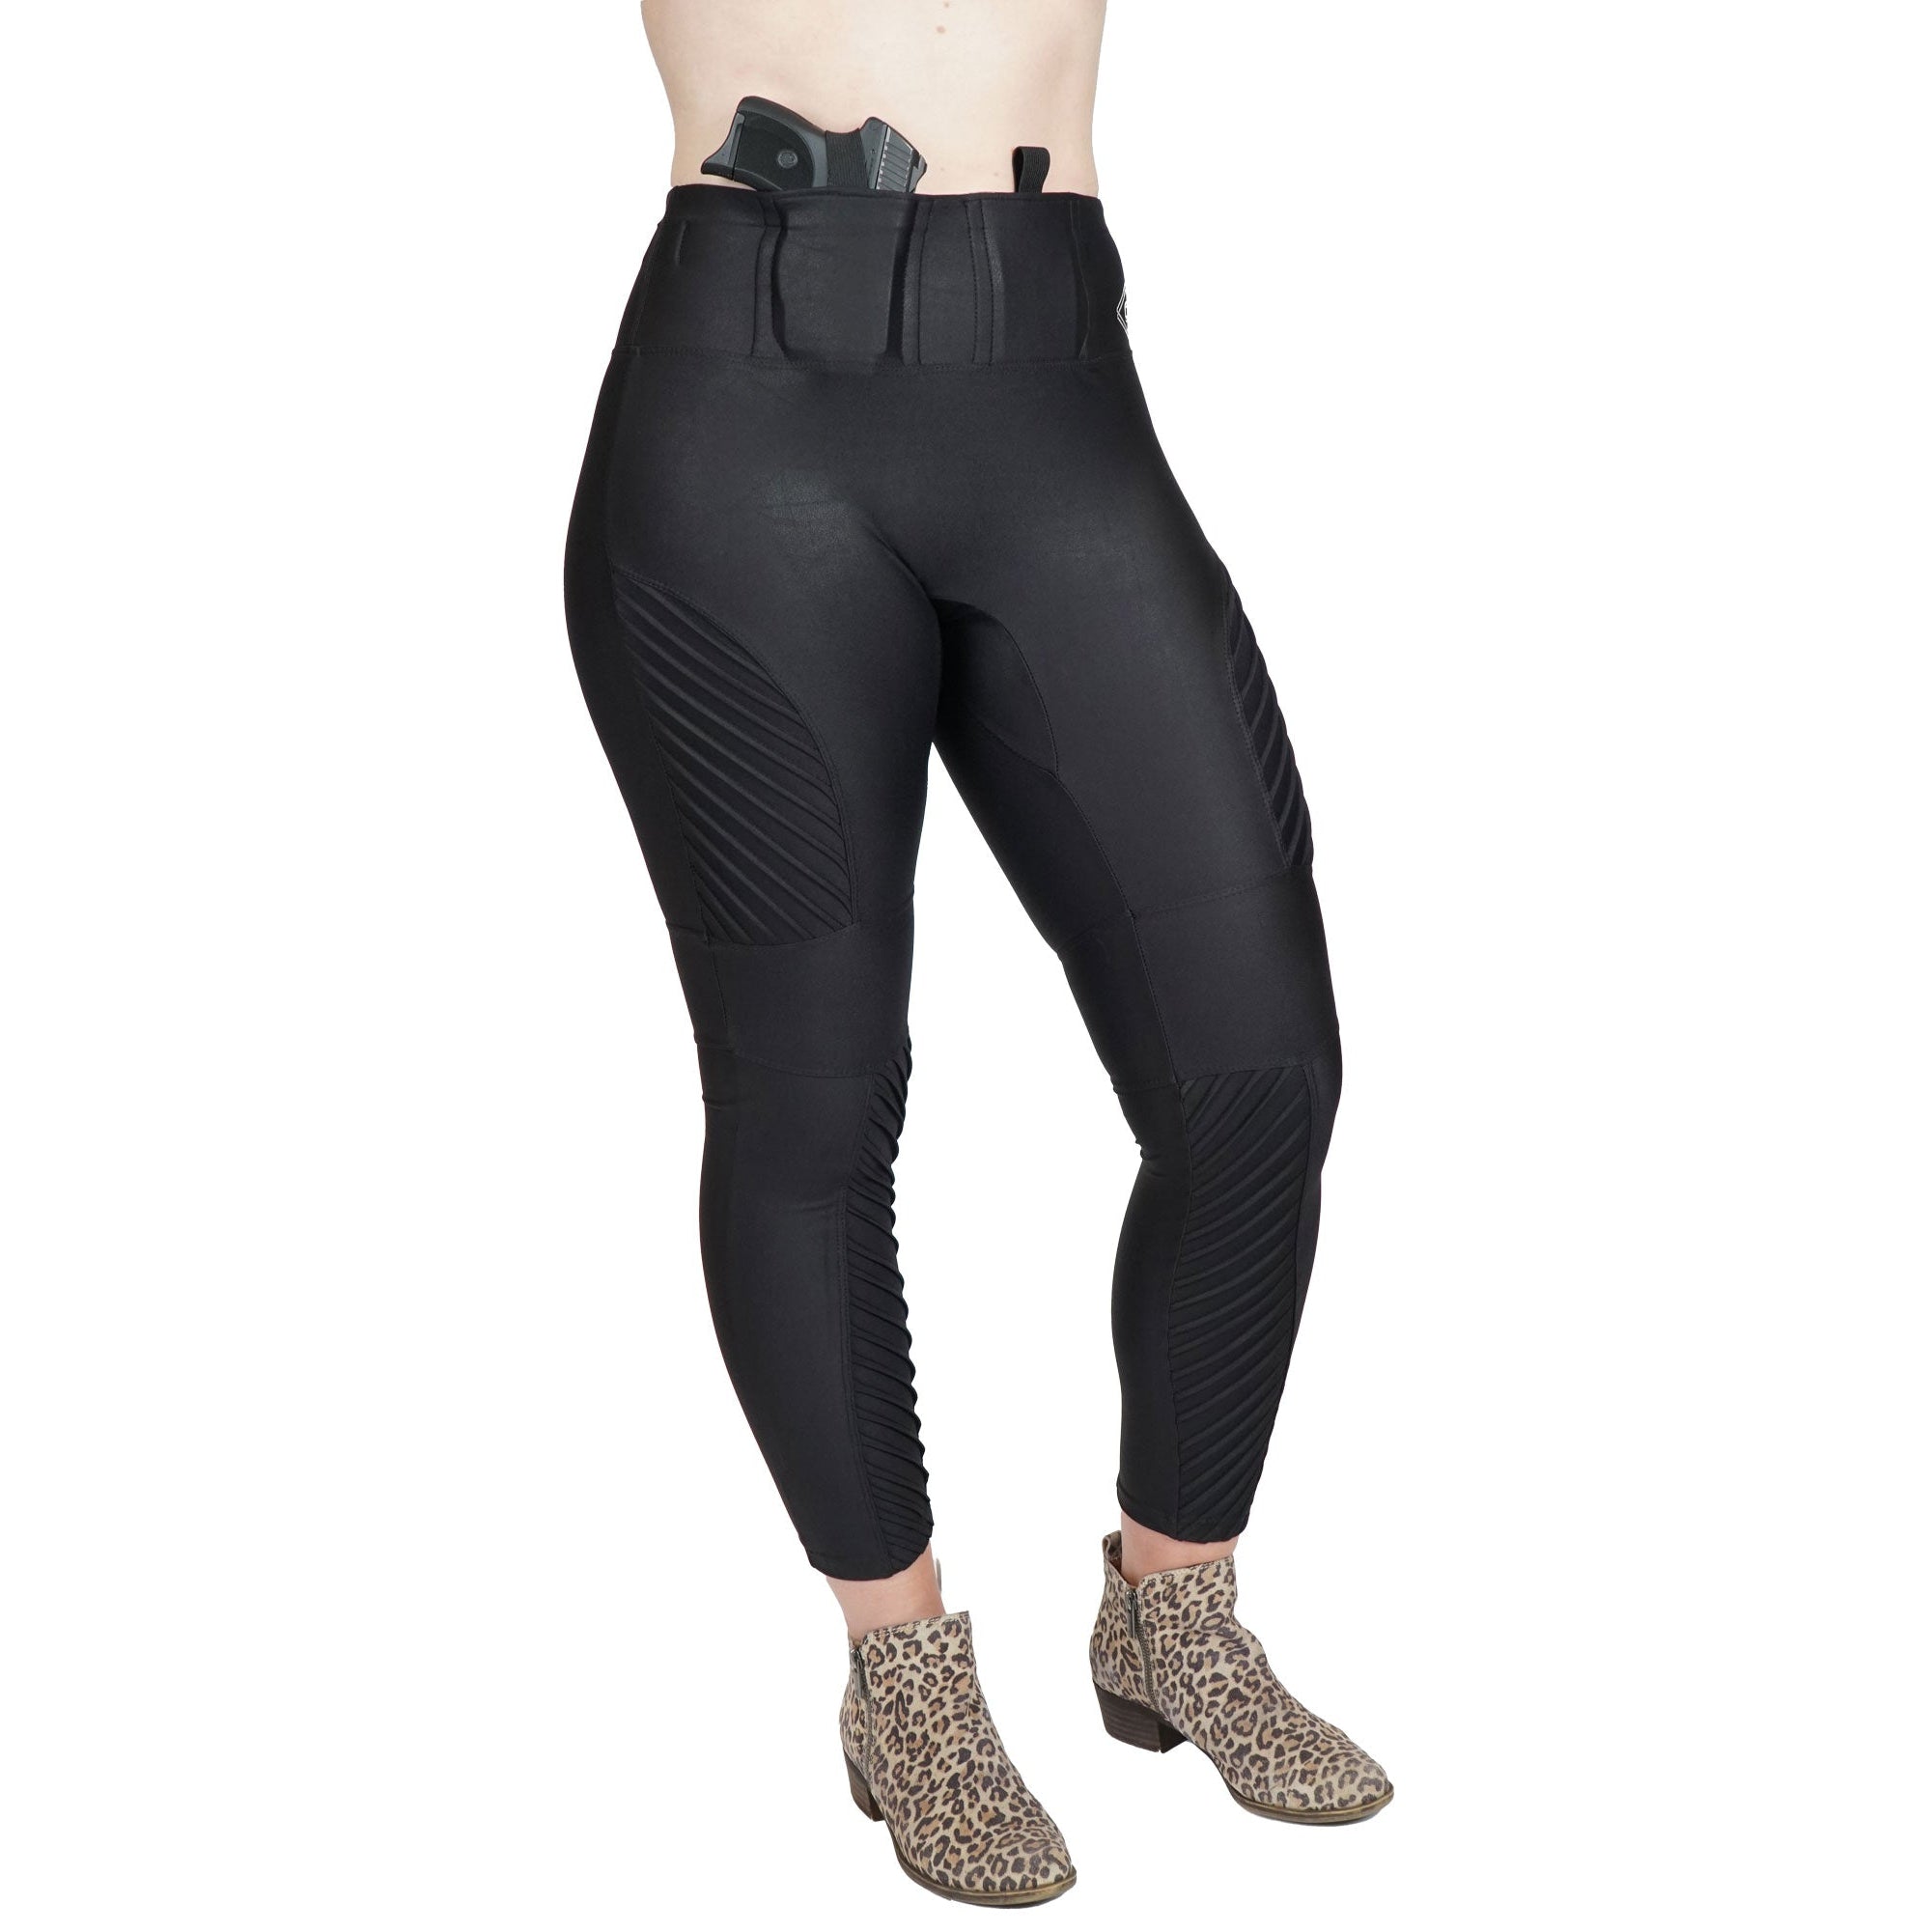 Justin Eclipse Concealed Carry Leggings in Mint – G3 Mercantile